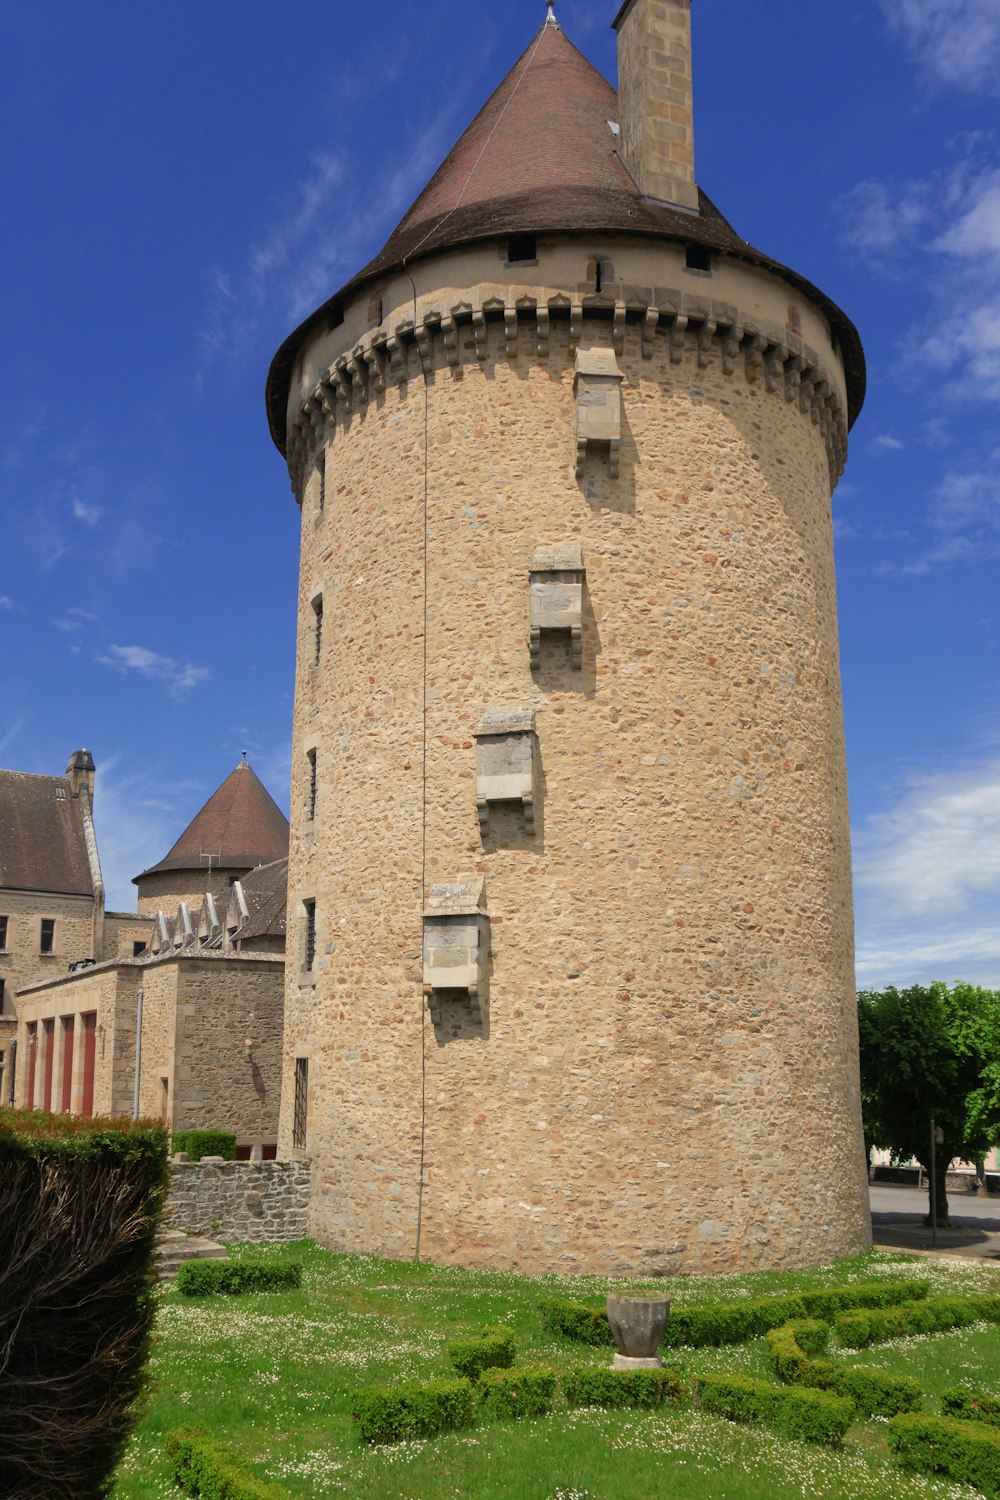 a stone tower with a pointed top